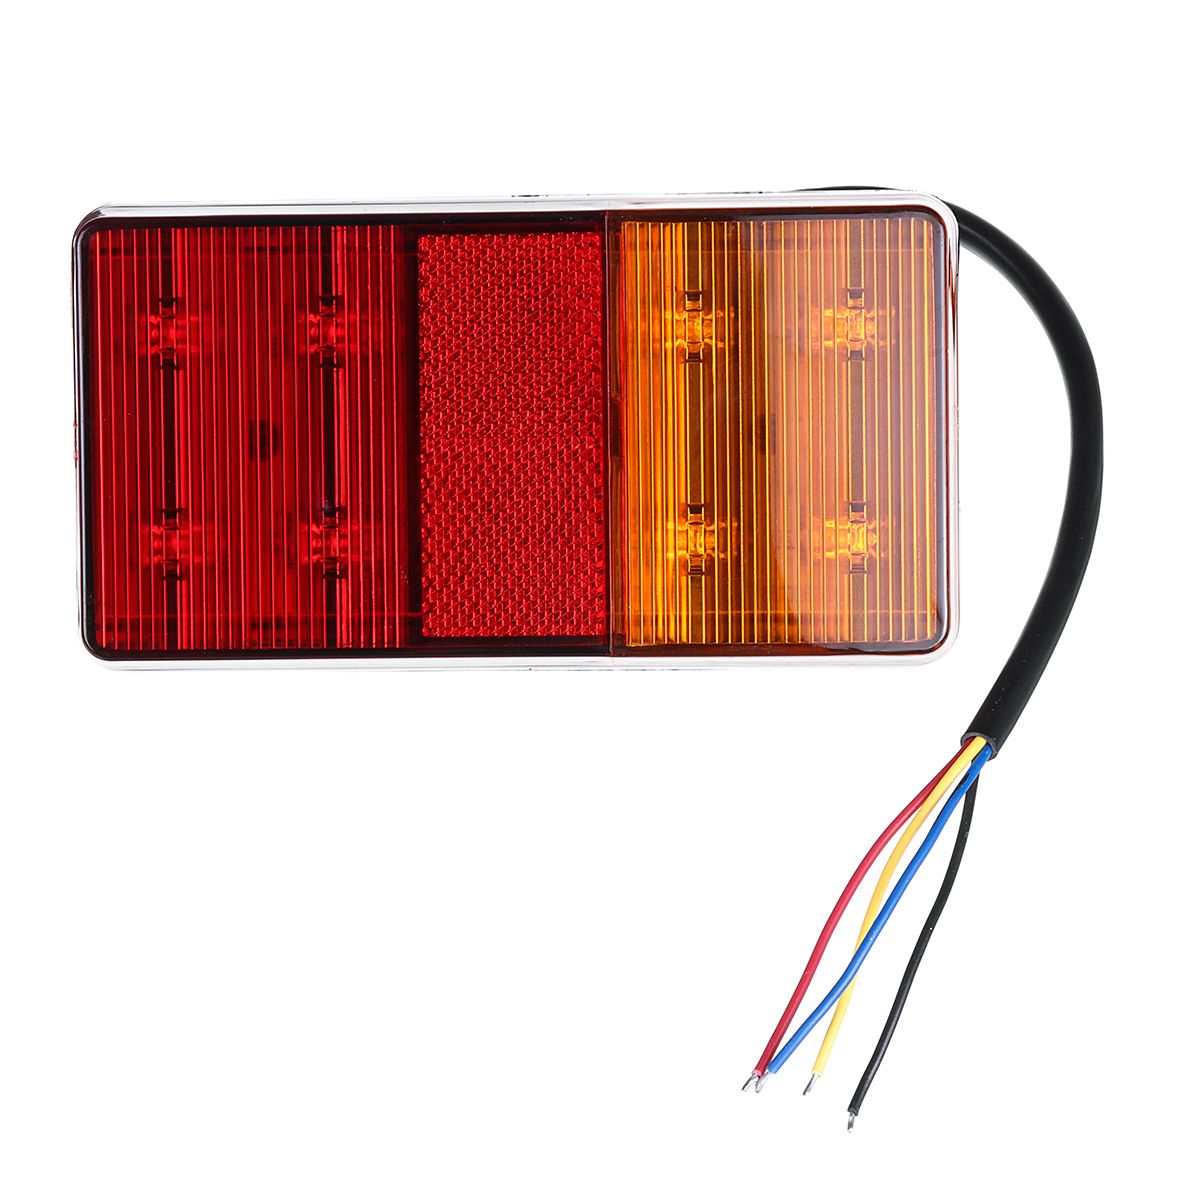 2PCS-8-LED-Tail-Brake-Indicator-Lights-IP67-Waterproof-Red-Yellow-Color-Universal-For-12V-Truck-Trai-1562508